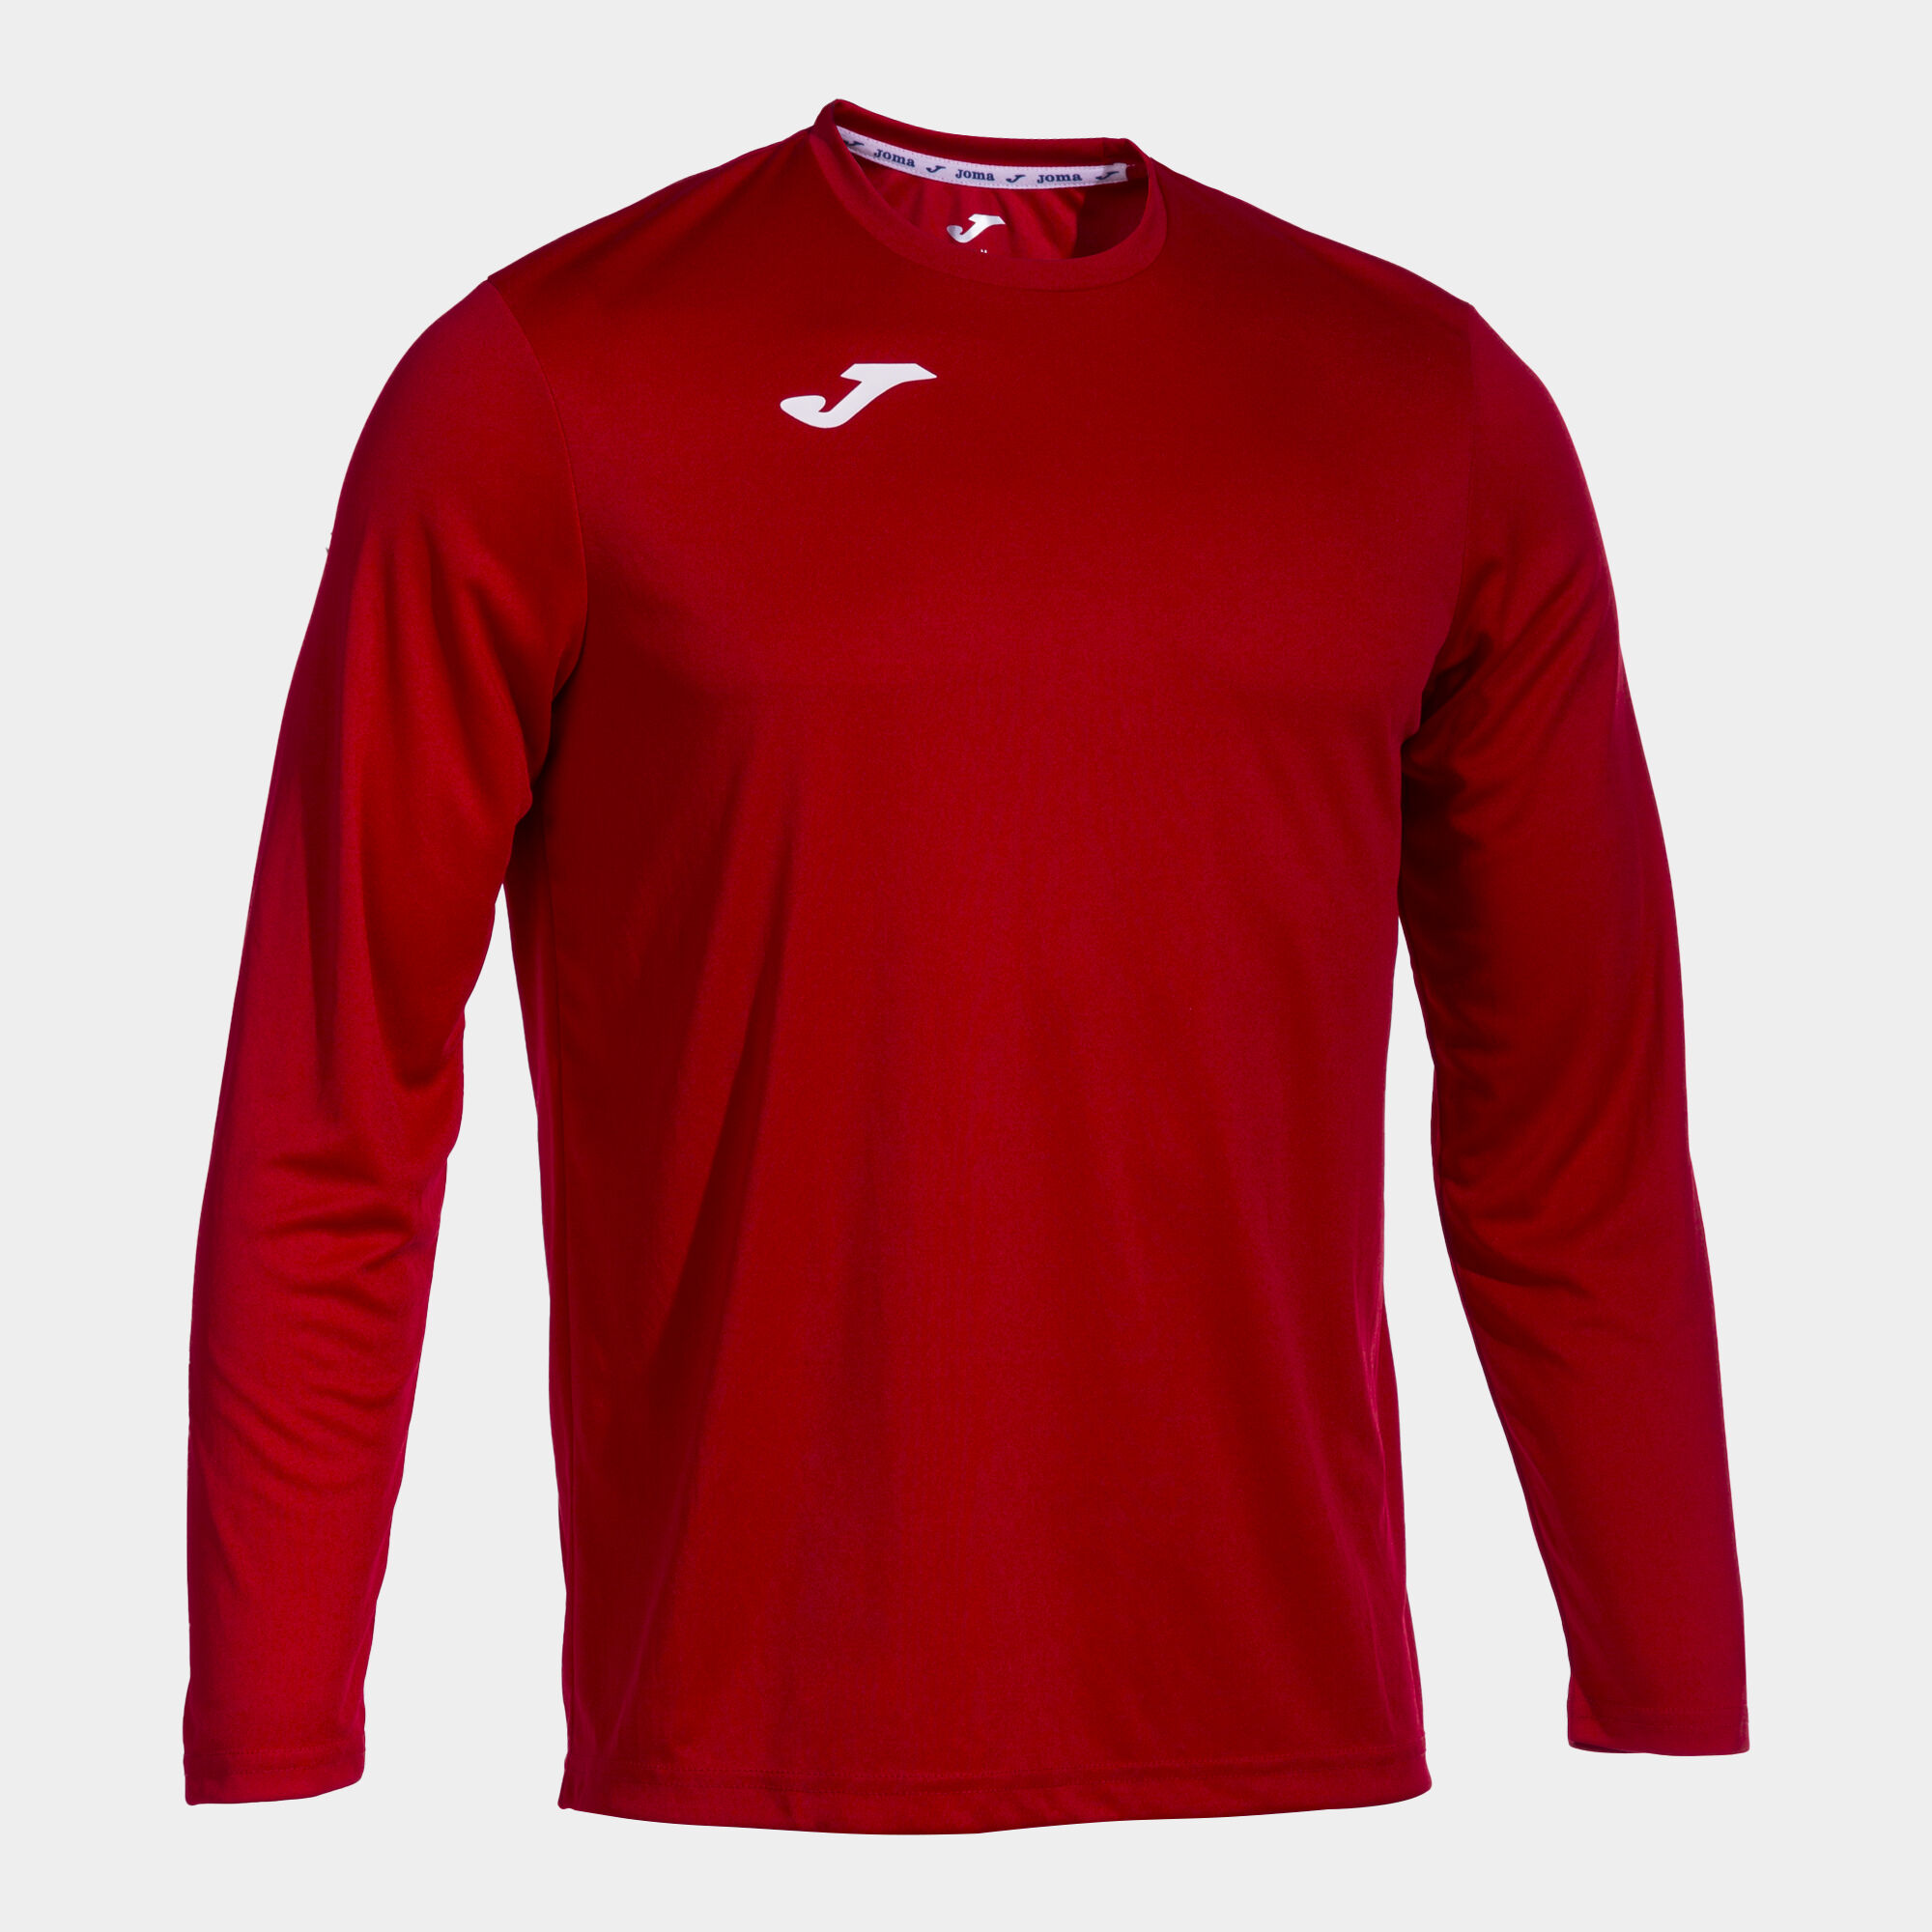 MAILLOT MANCHES LONGUES HOMME COMBI ROUGE